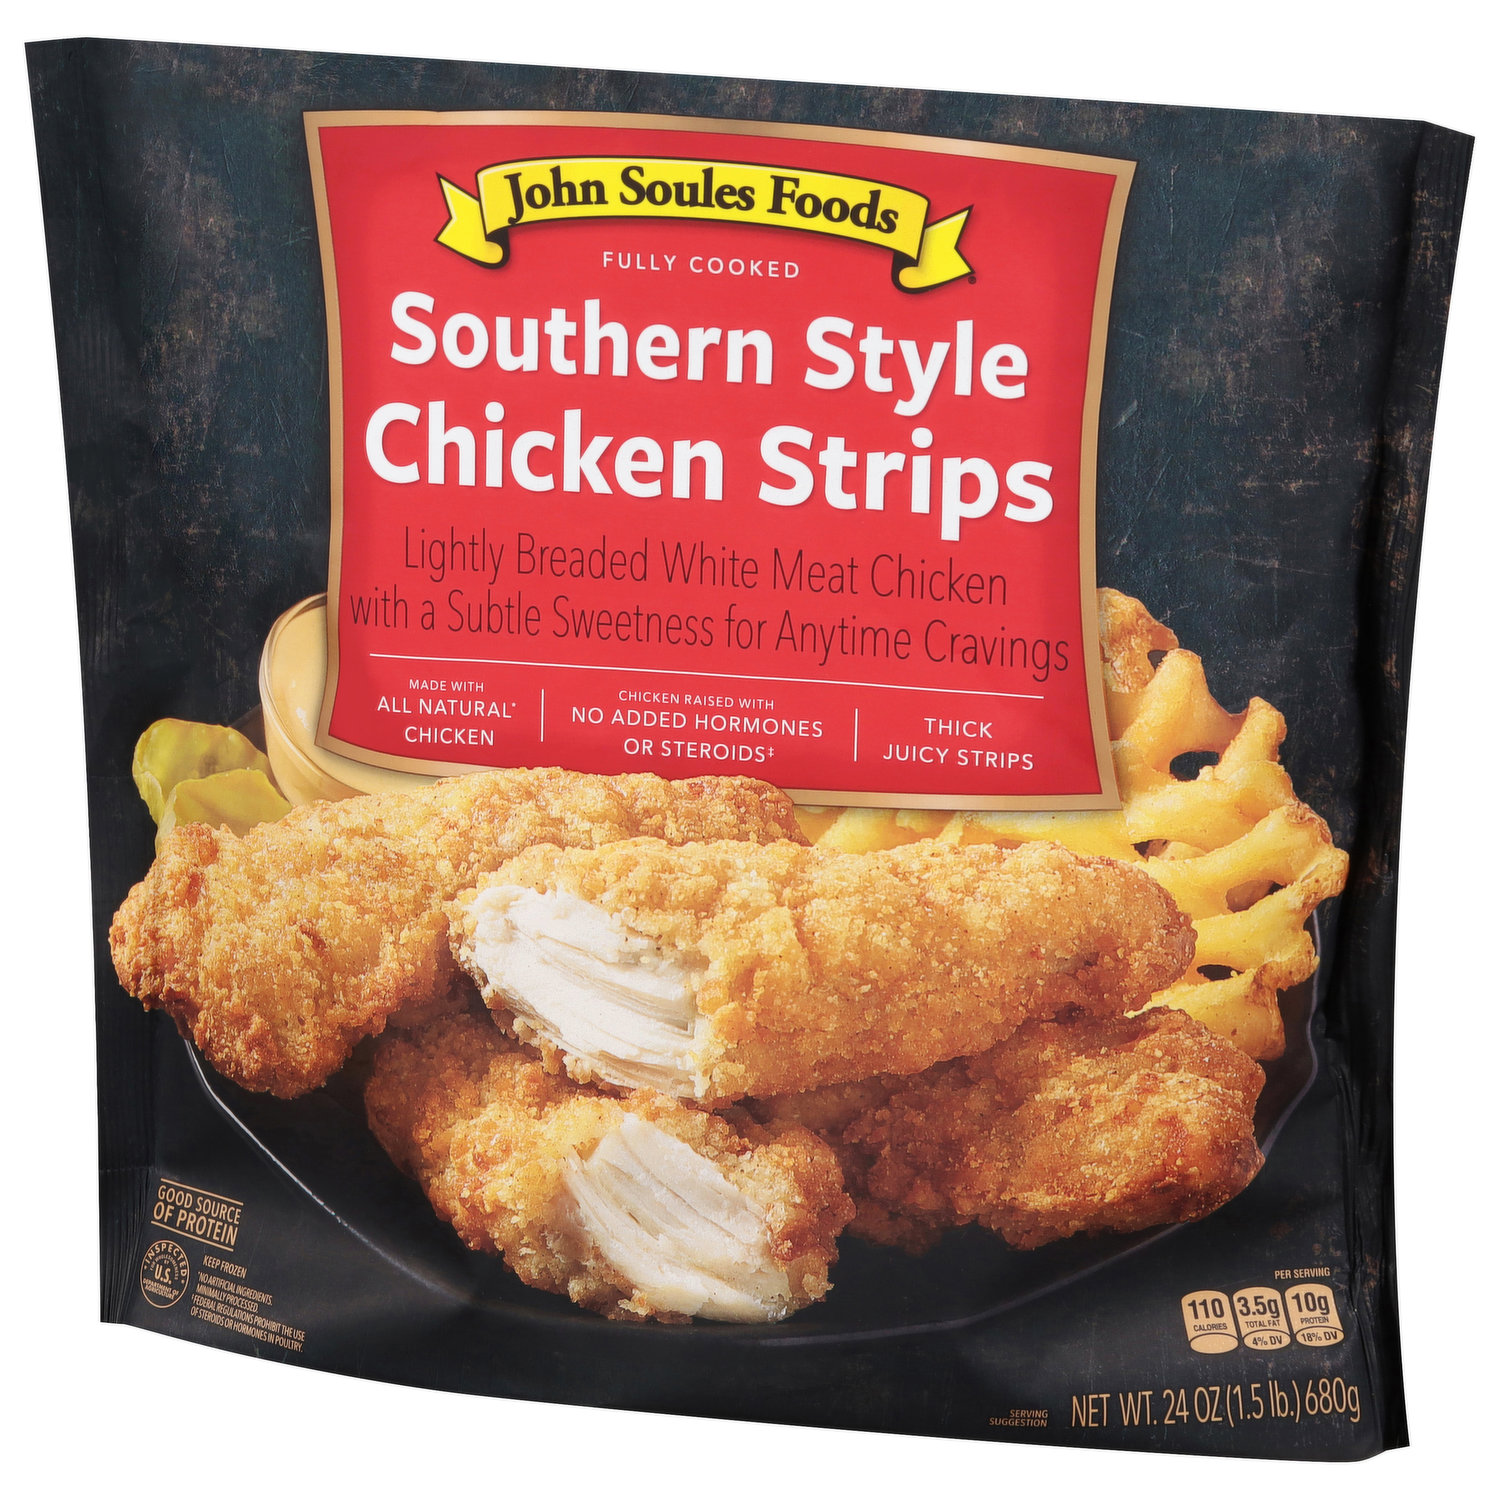 Southern Strips, Soules Chicken Style Foods John